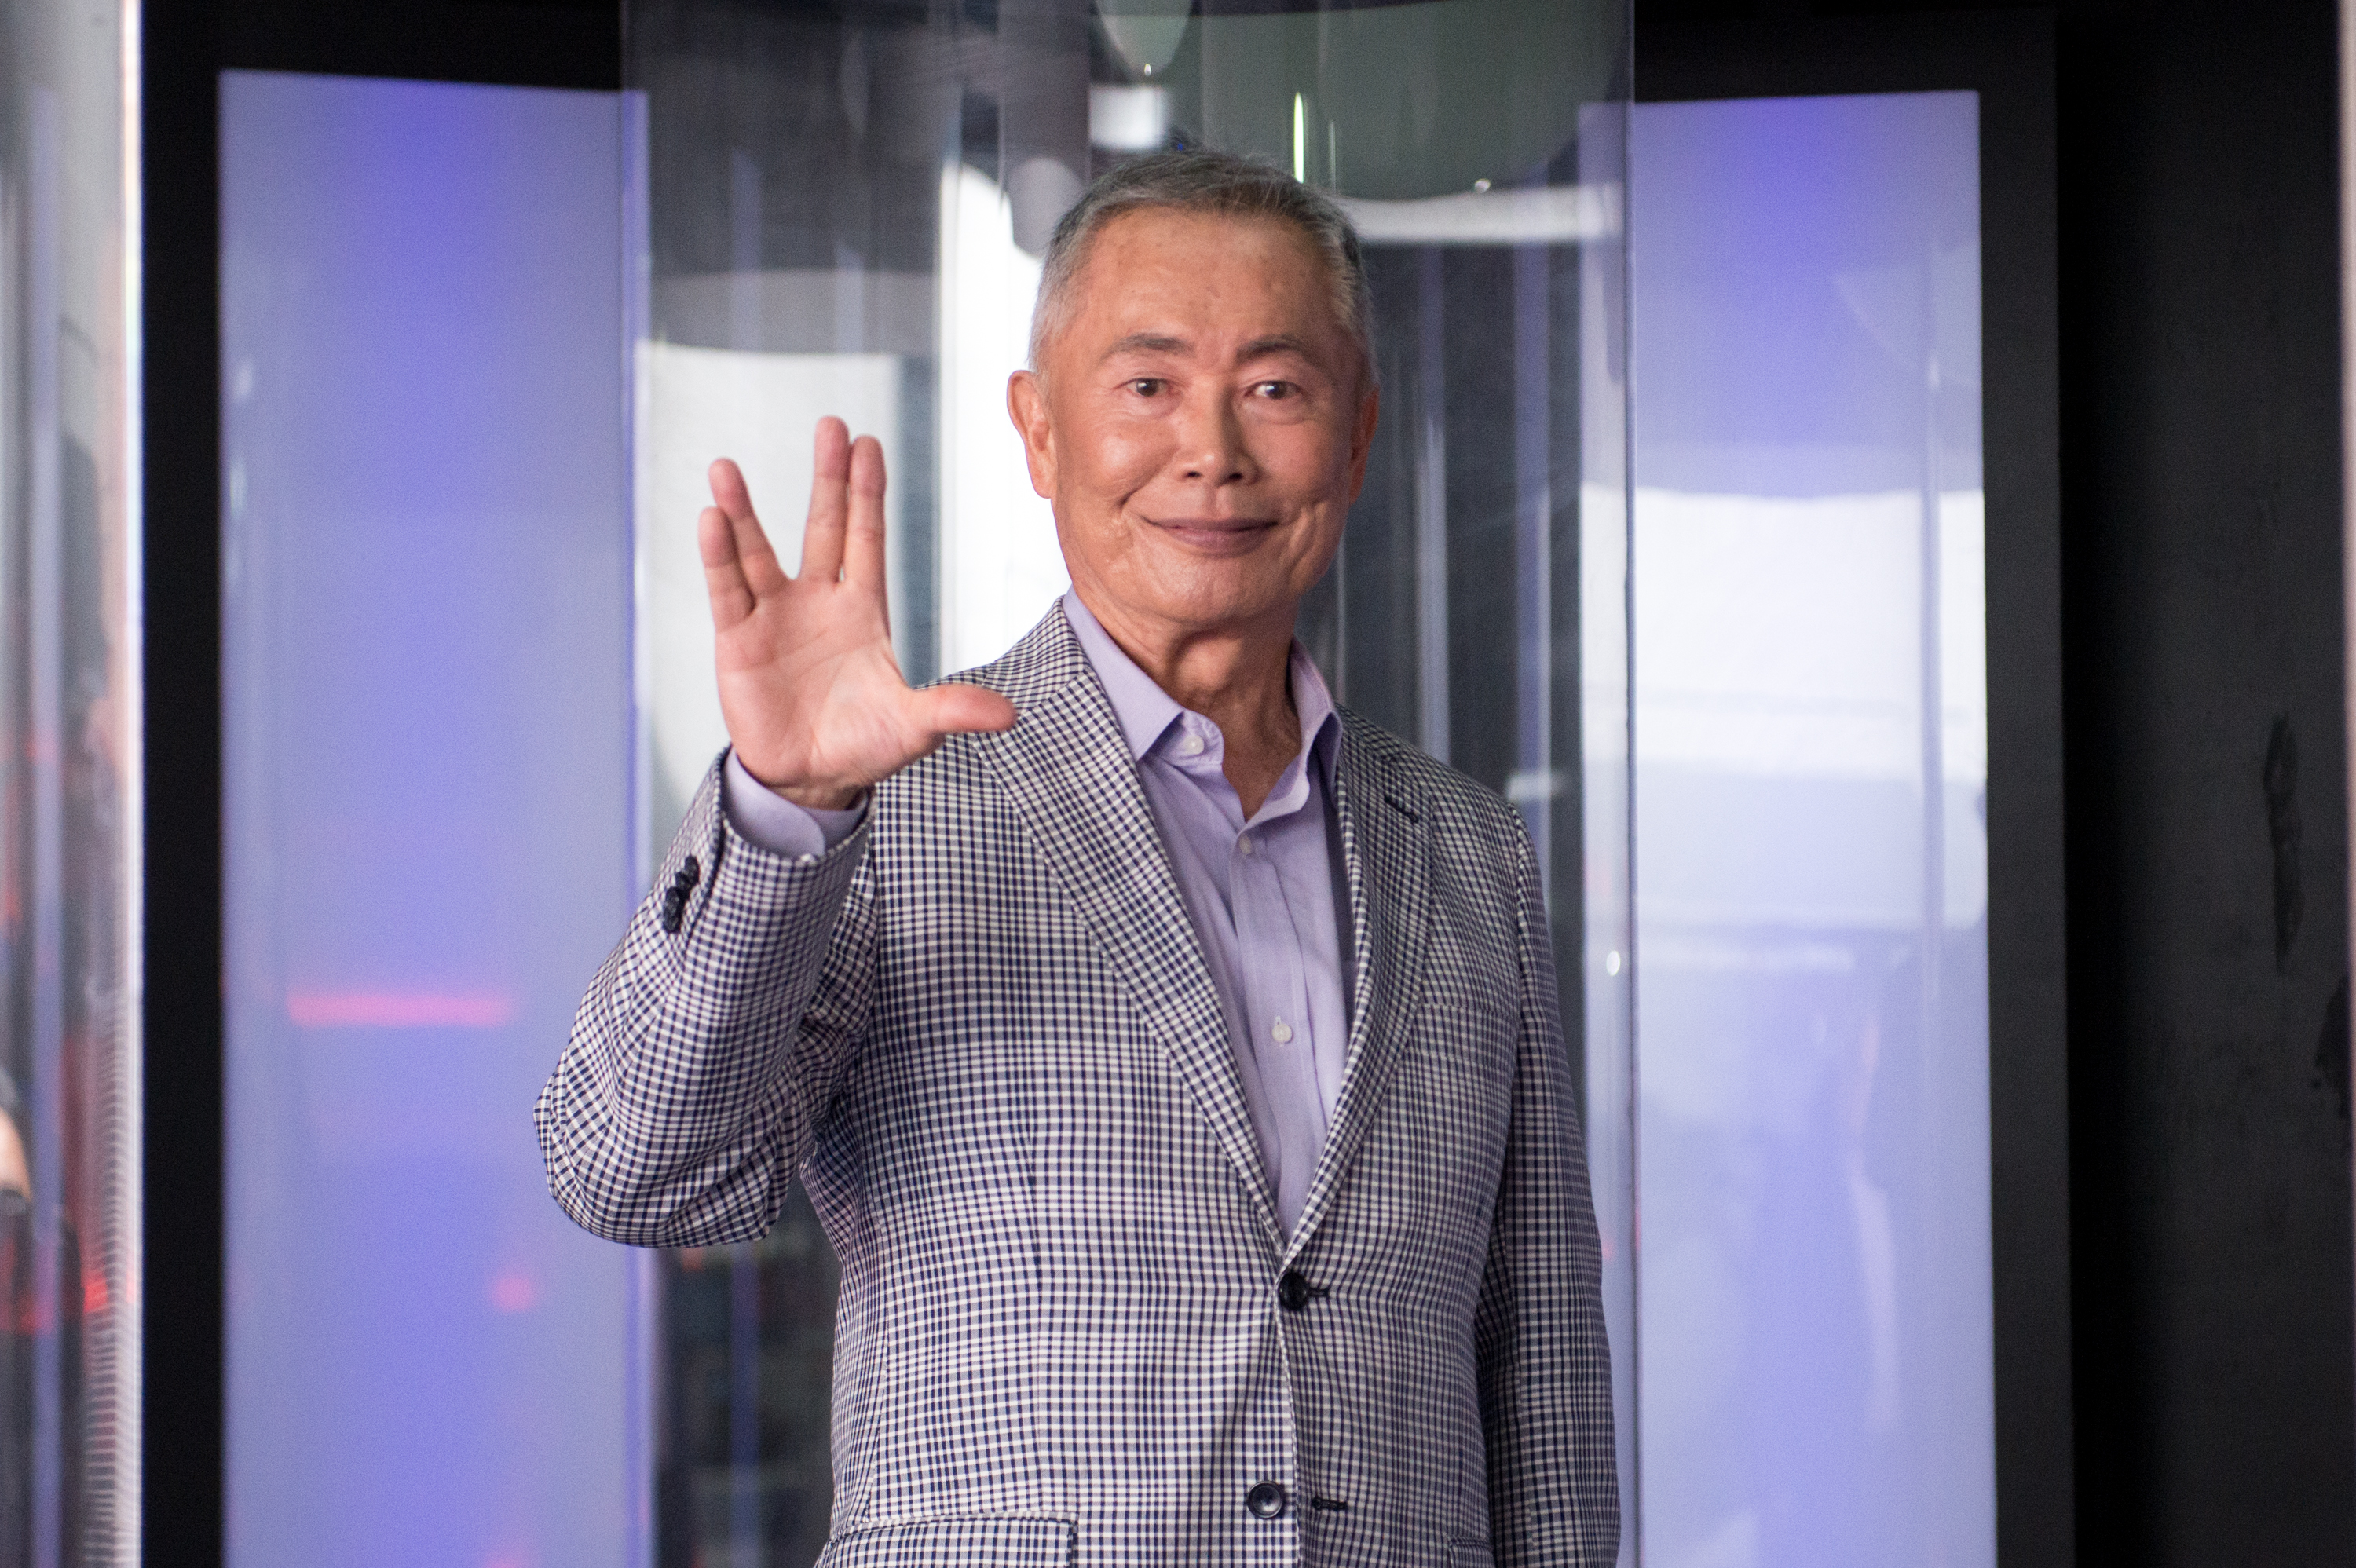 Actor George Takei attends the Star Trek: The Star Fleet Academy Experience at Intrepid Sea-Air-Space Museum on June 30, 2016 in New York City. (Noam Galai&mdash;WireImage/Getty Images)